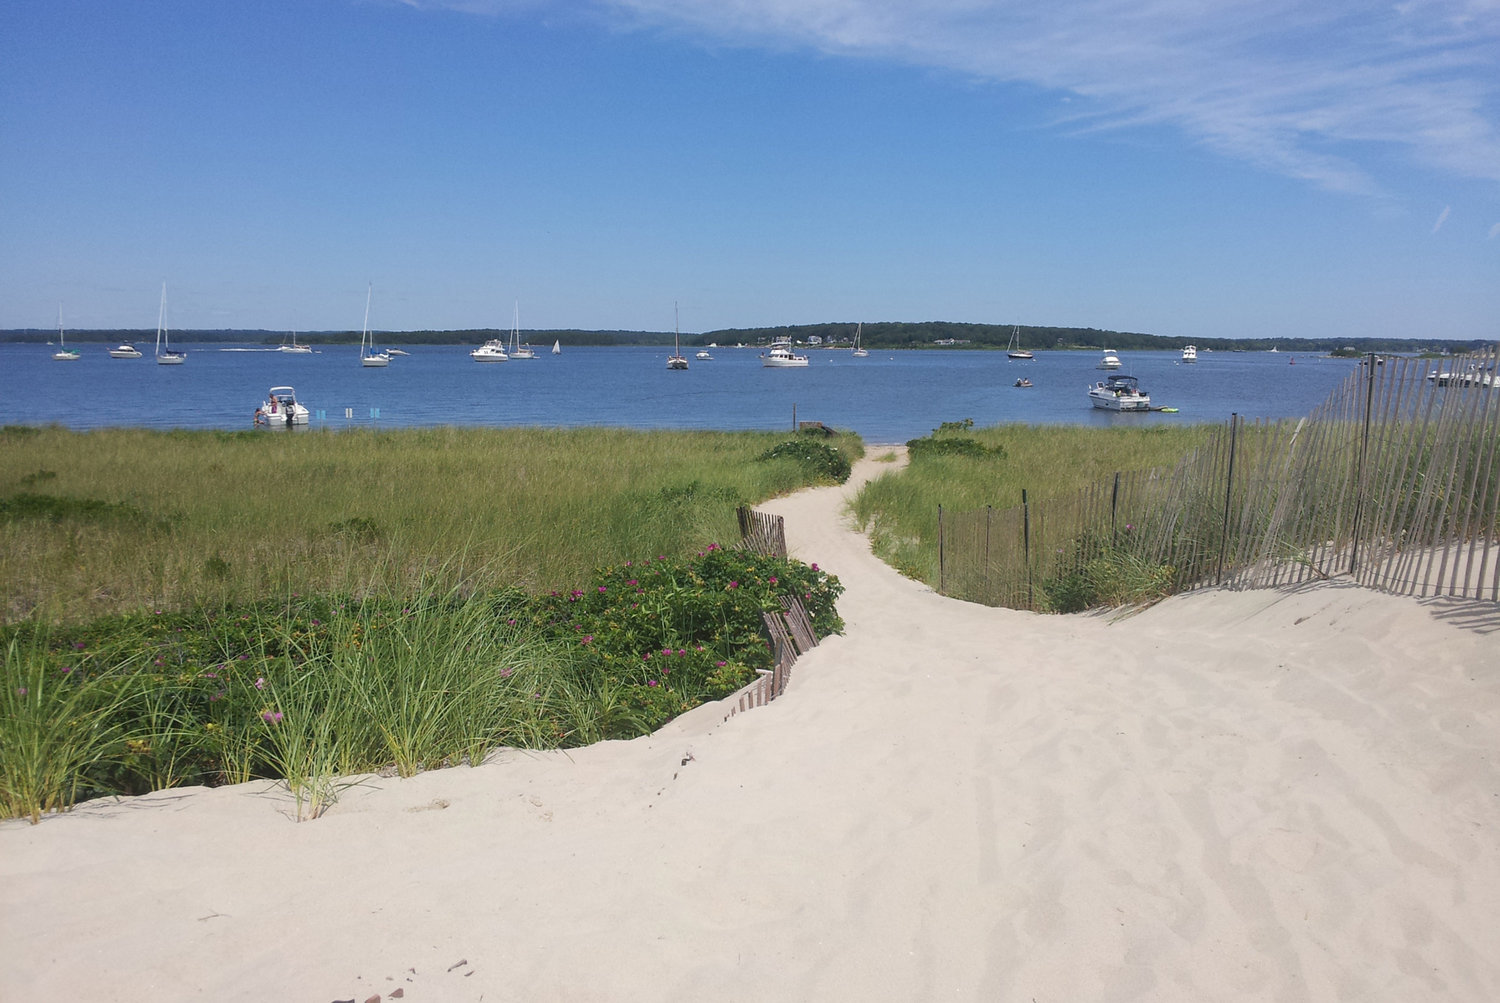 Napatree Point is both a wildlife preserve and popular public beach